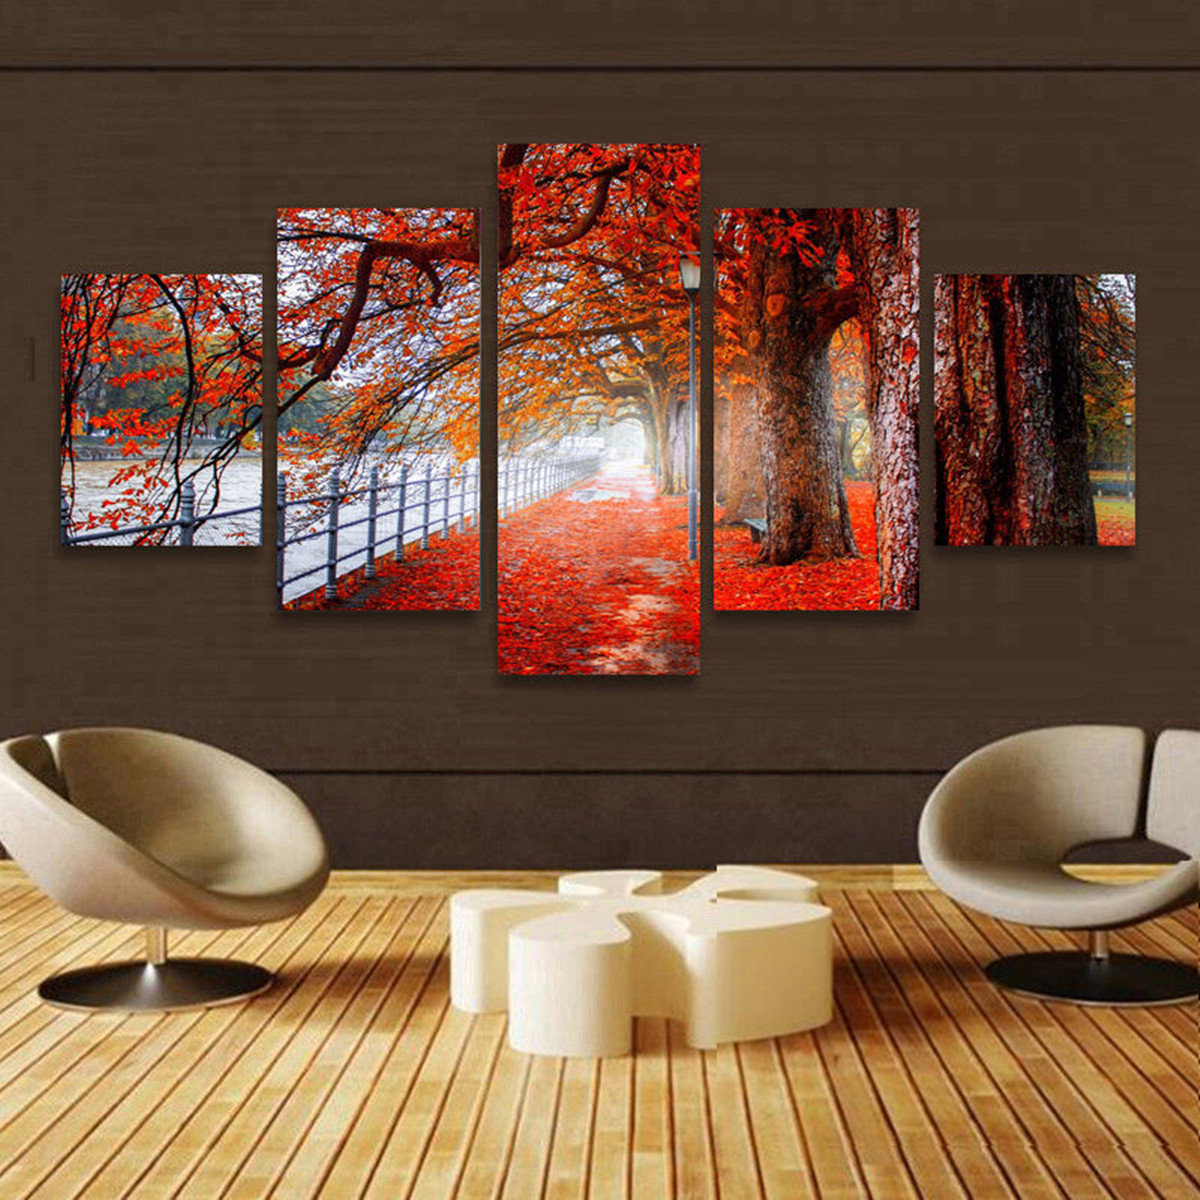 

5Pcs Unframed Autumn Red Tree Abstract Canvas Wall Painting Picture Home Decor